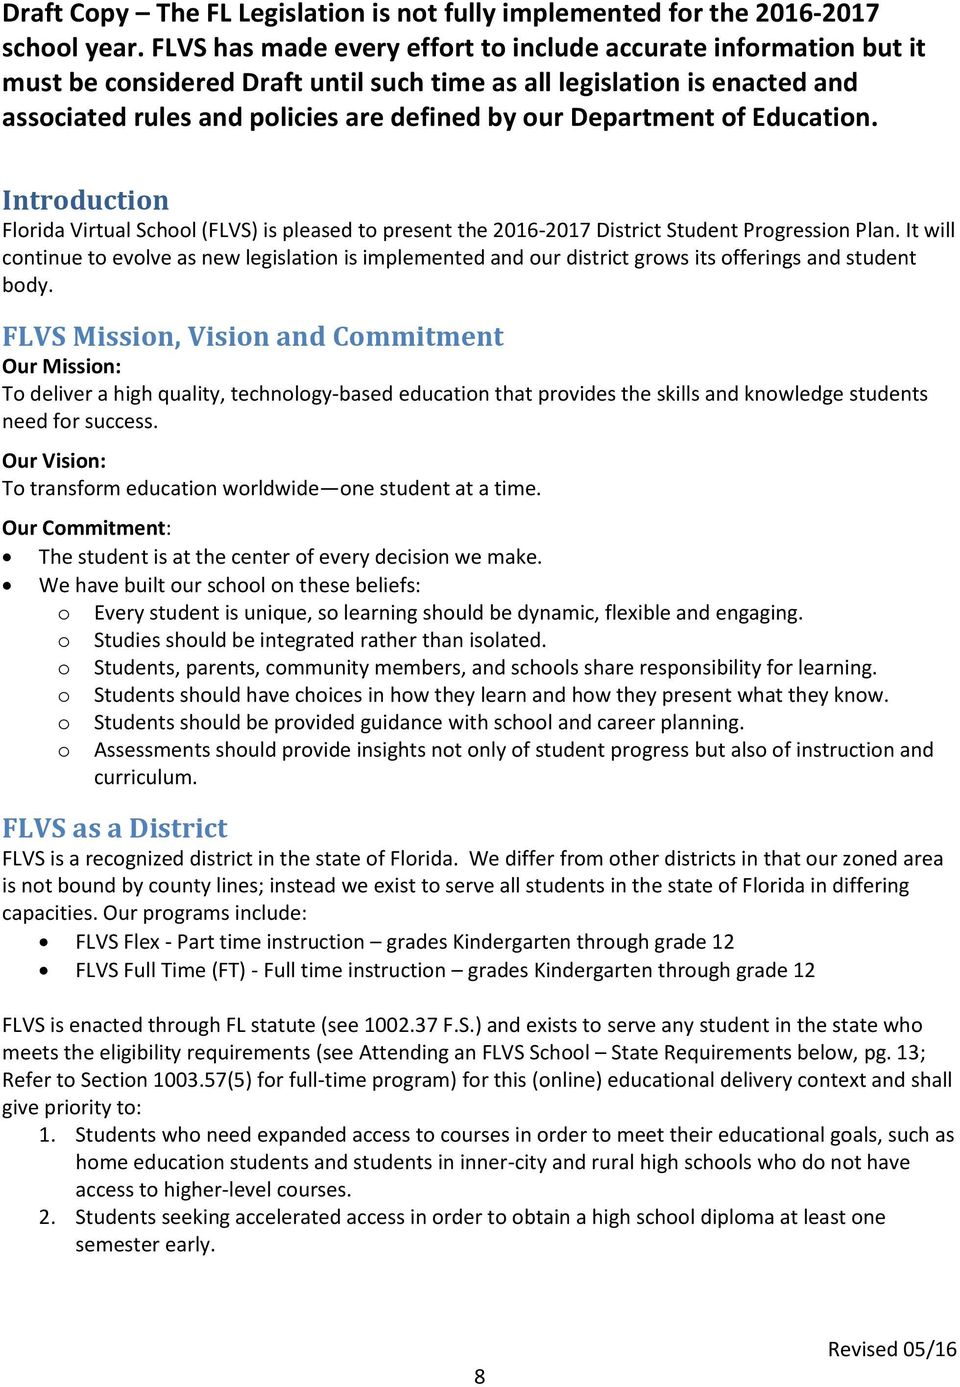 Department of Education. Introduction Florida Virtual School (FLVS) is pleased to present the 2016-2017 District Student Progression Plan.